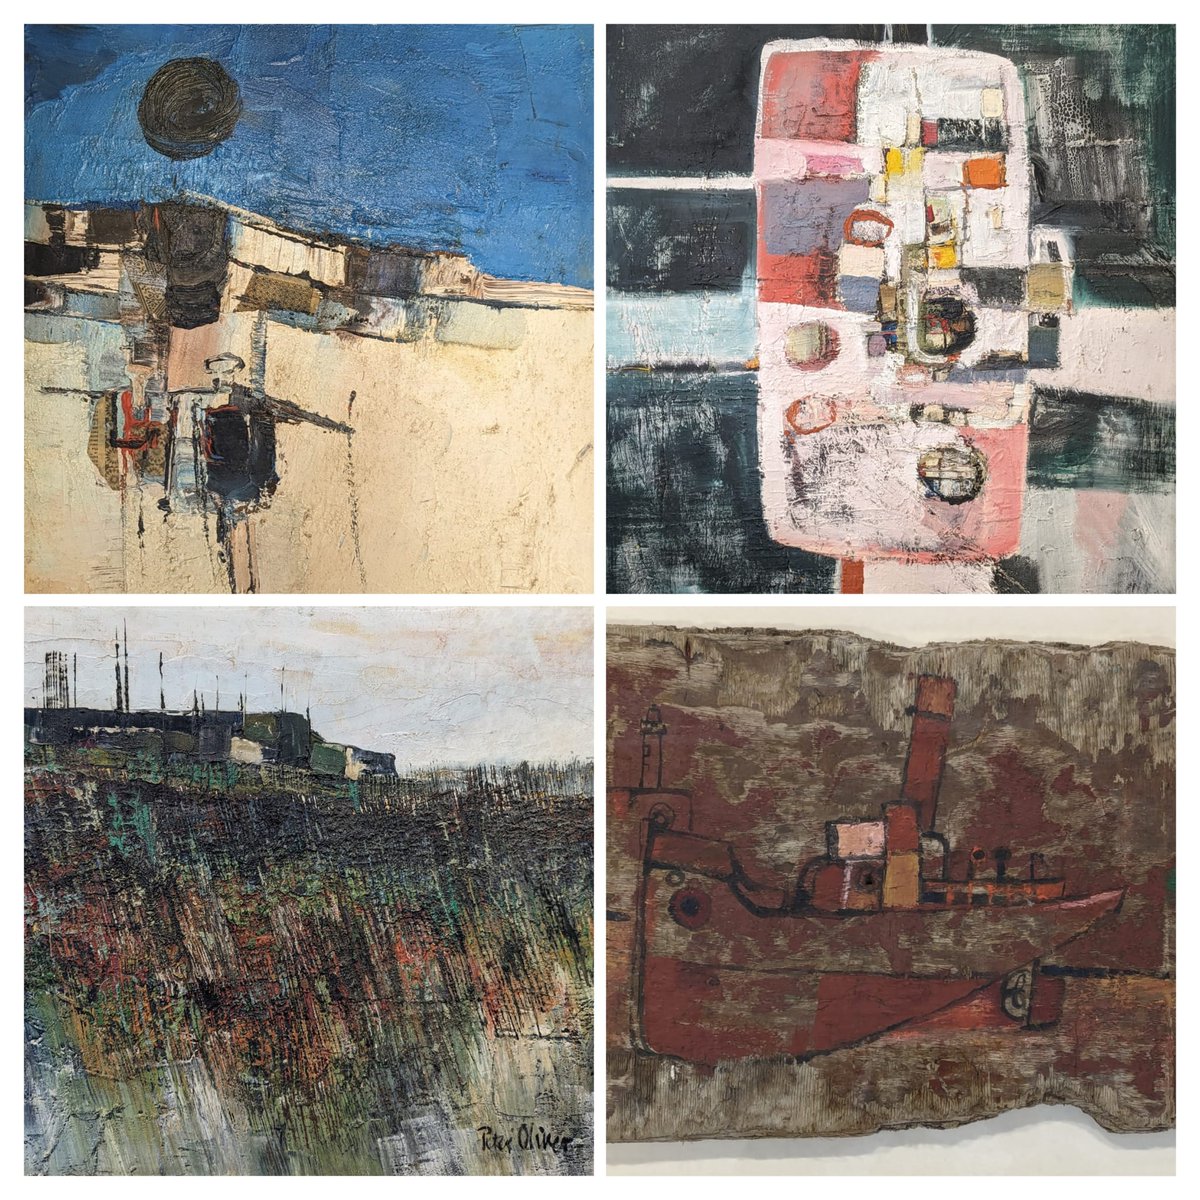 🚚 DELIVERED FOR AUCTION THIS WEEK  🚚

Collection of Peter Oliver works (sample shown) consigned via the artists' family

ESTIMATES: Various
AUCTION: British & Continental Pictures
DATE: TBC

#modernart #britishart #britishartist #peteroliver #peteroliverart #peteroliverartist